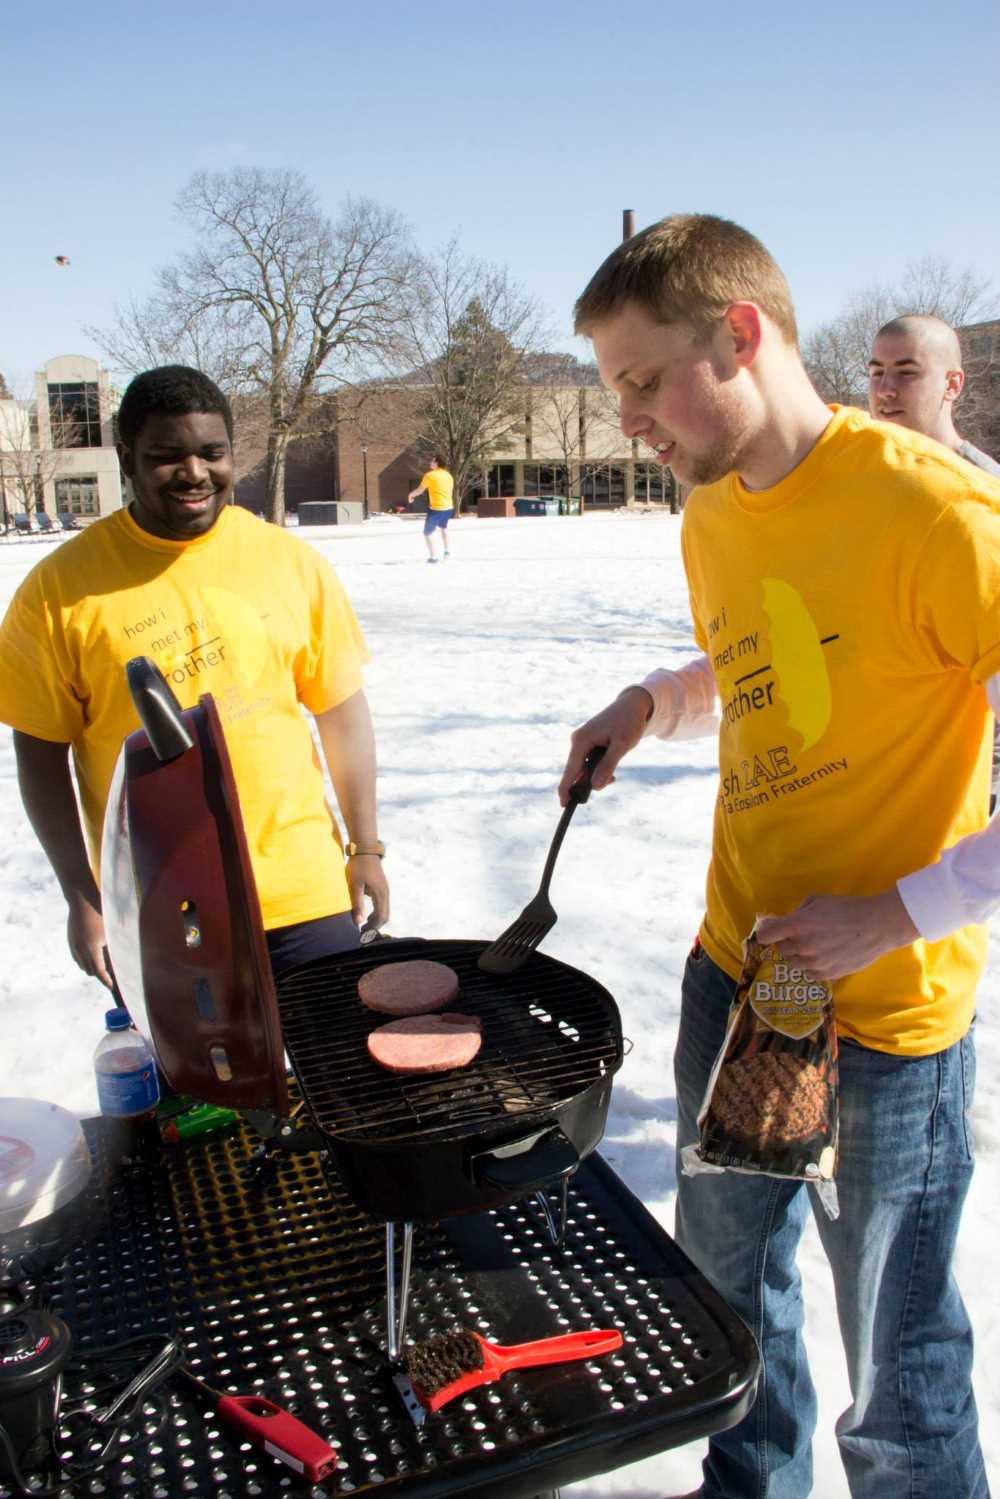 Lamda Chi members grill outside in the snow for their "How I Met Your Mother" brotherhood. 